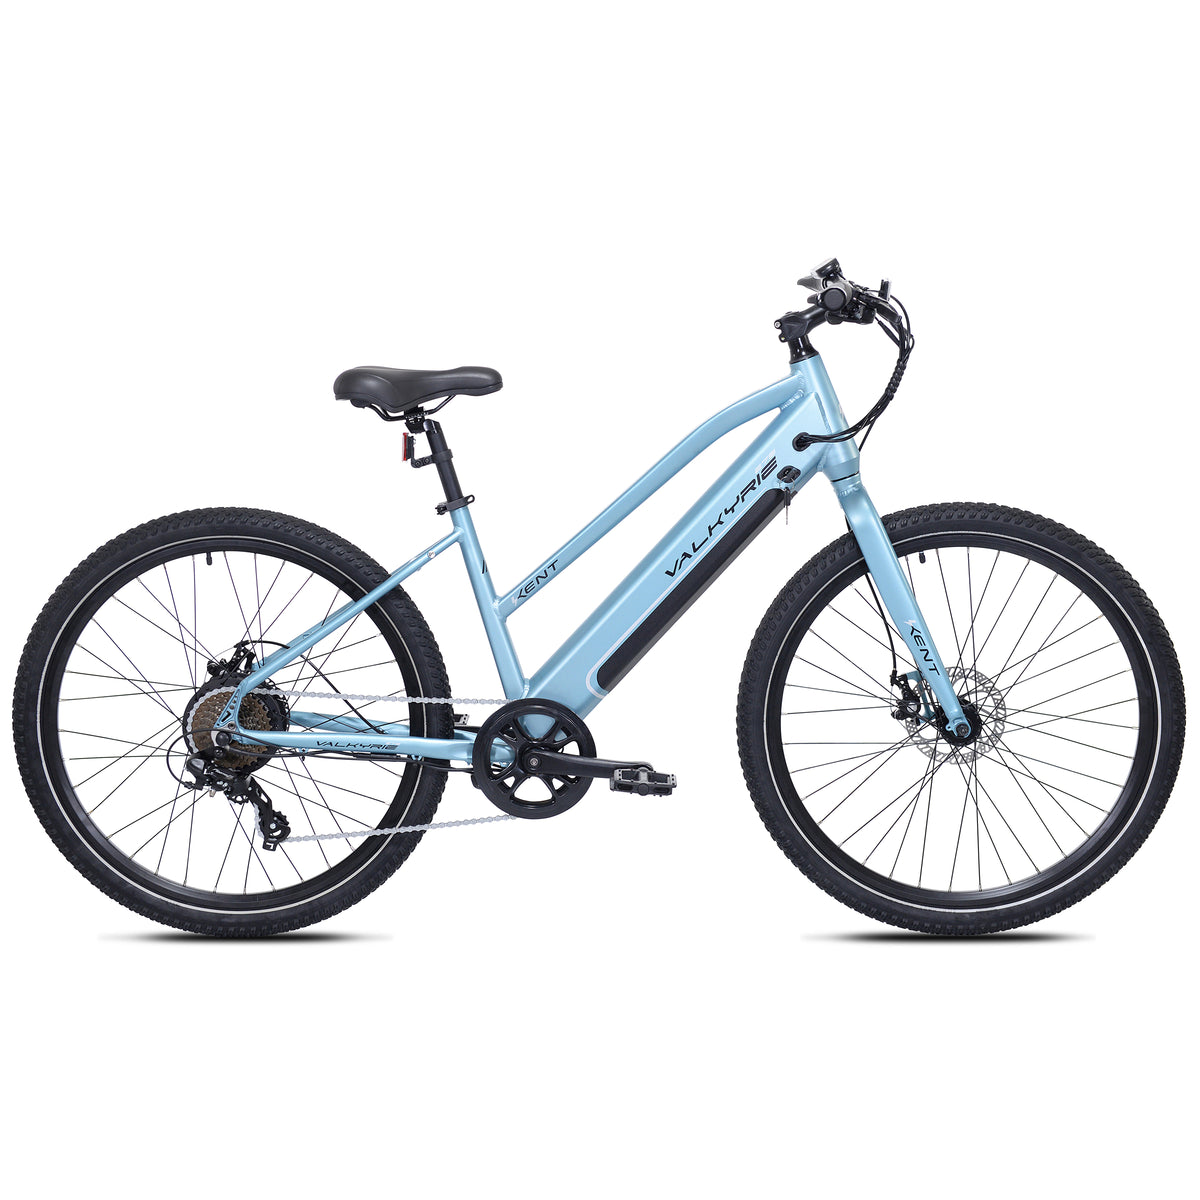 27.5" Kent Valkyrie E-Bike | Electric Mountain Bike for Women Ages 14+